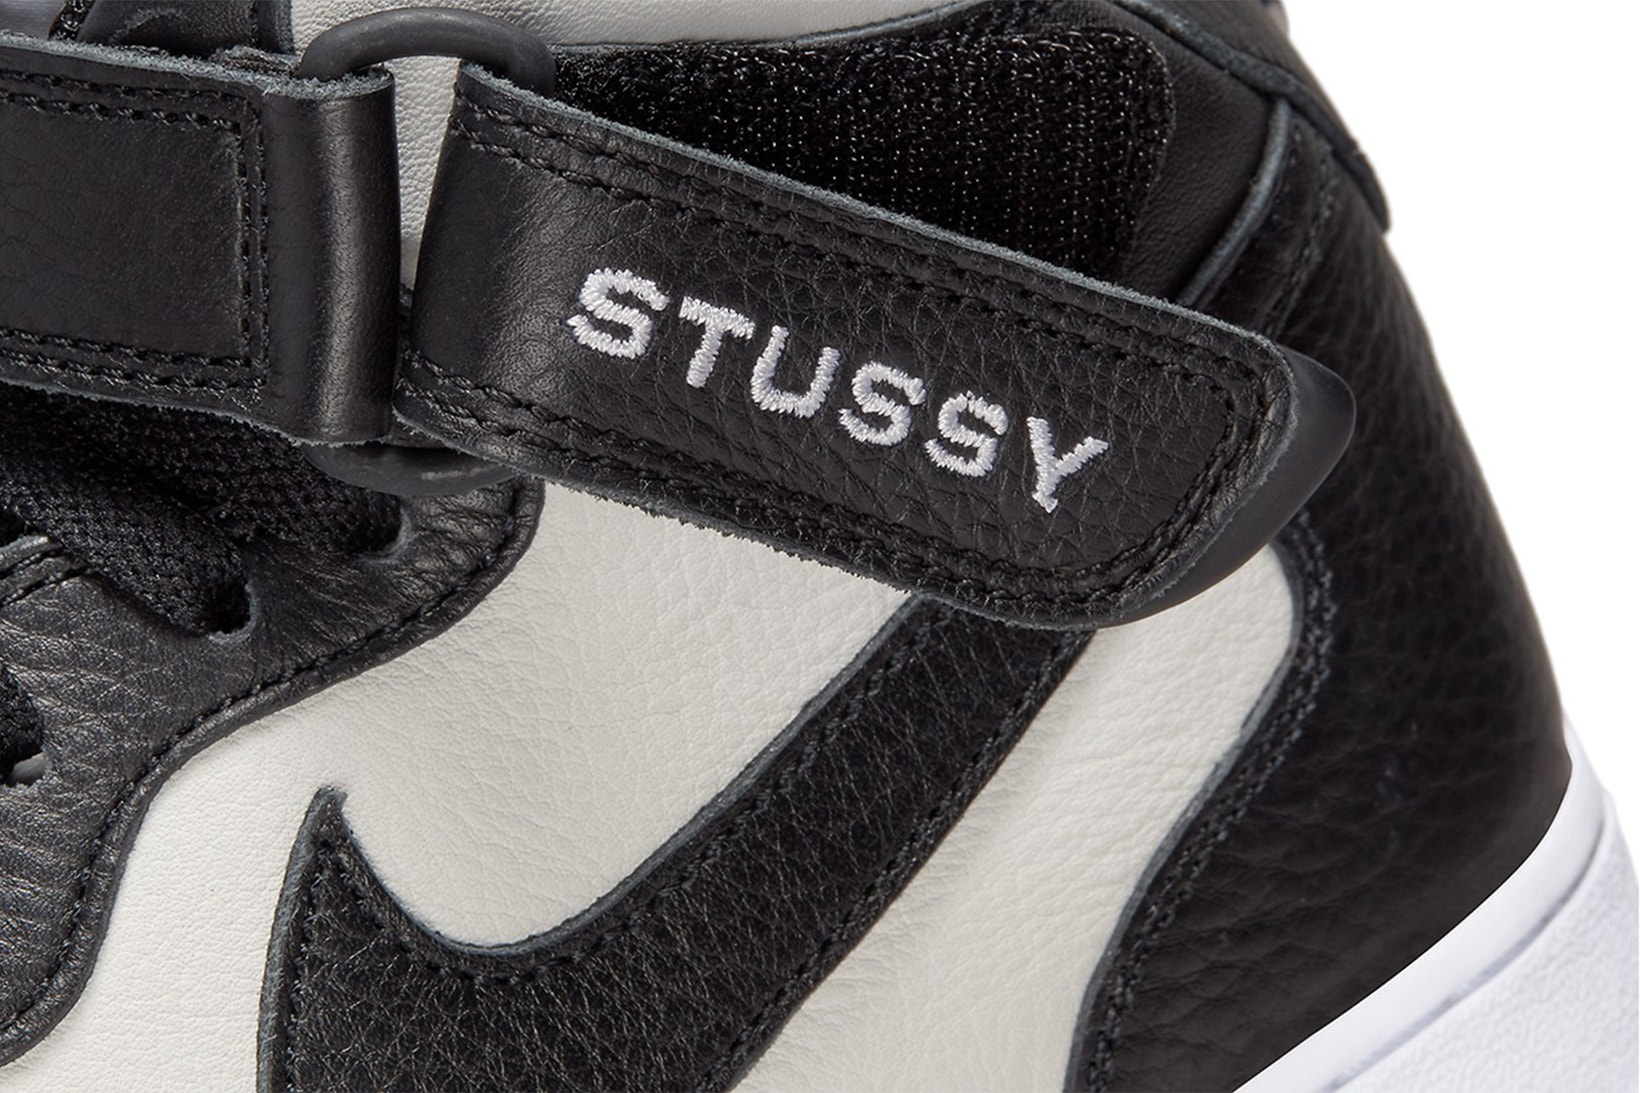 Stüssy Nike Air Force 1 Mid Sneakers Black White Ankle Strap Details